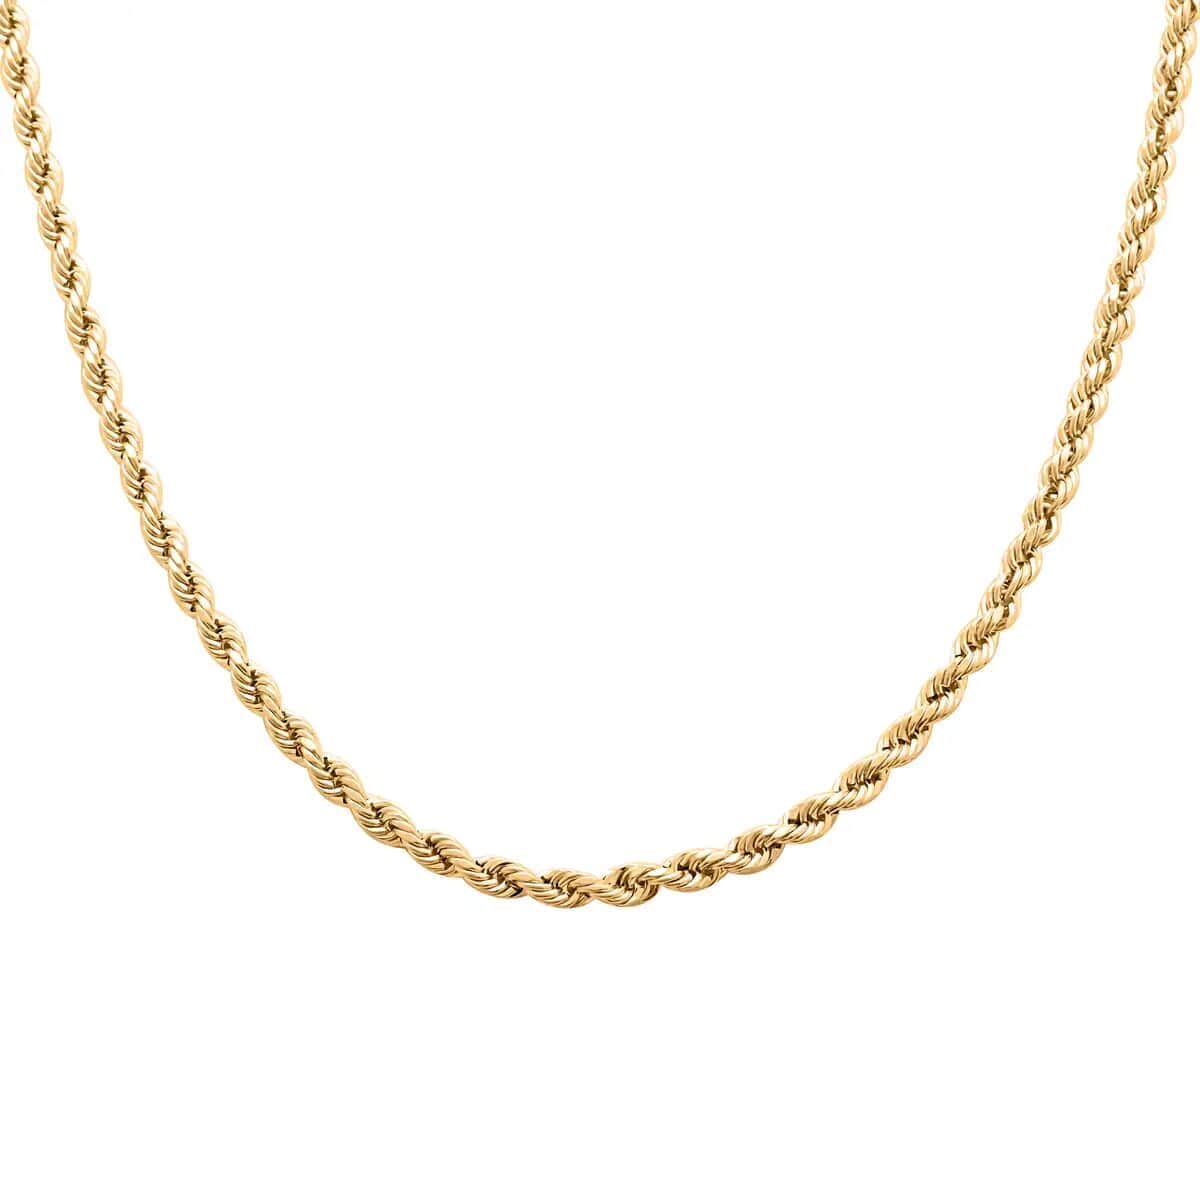 14K Yellow Gold Rope Chain Necklace, Gold Rope Necklace, Gold Gift, 26 Inch Chain Necklace 9.3 grams image number 0